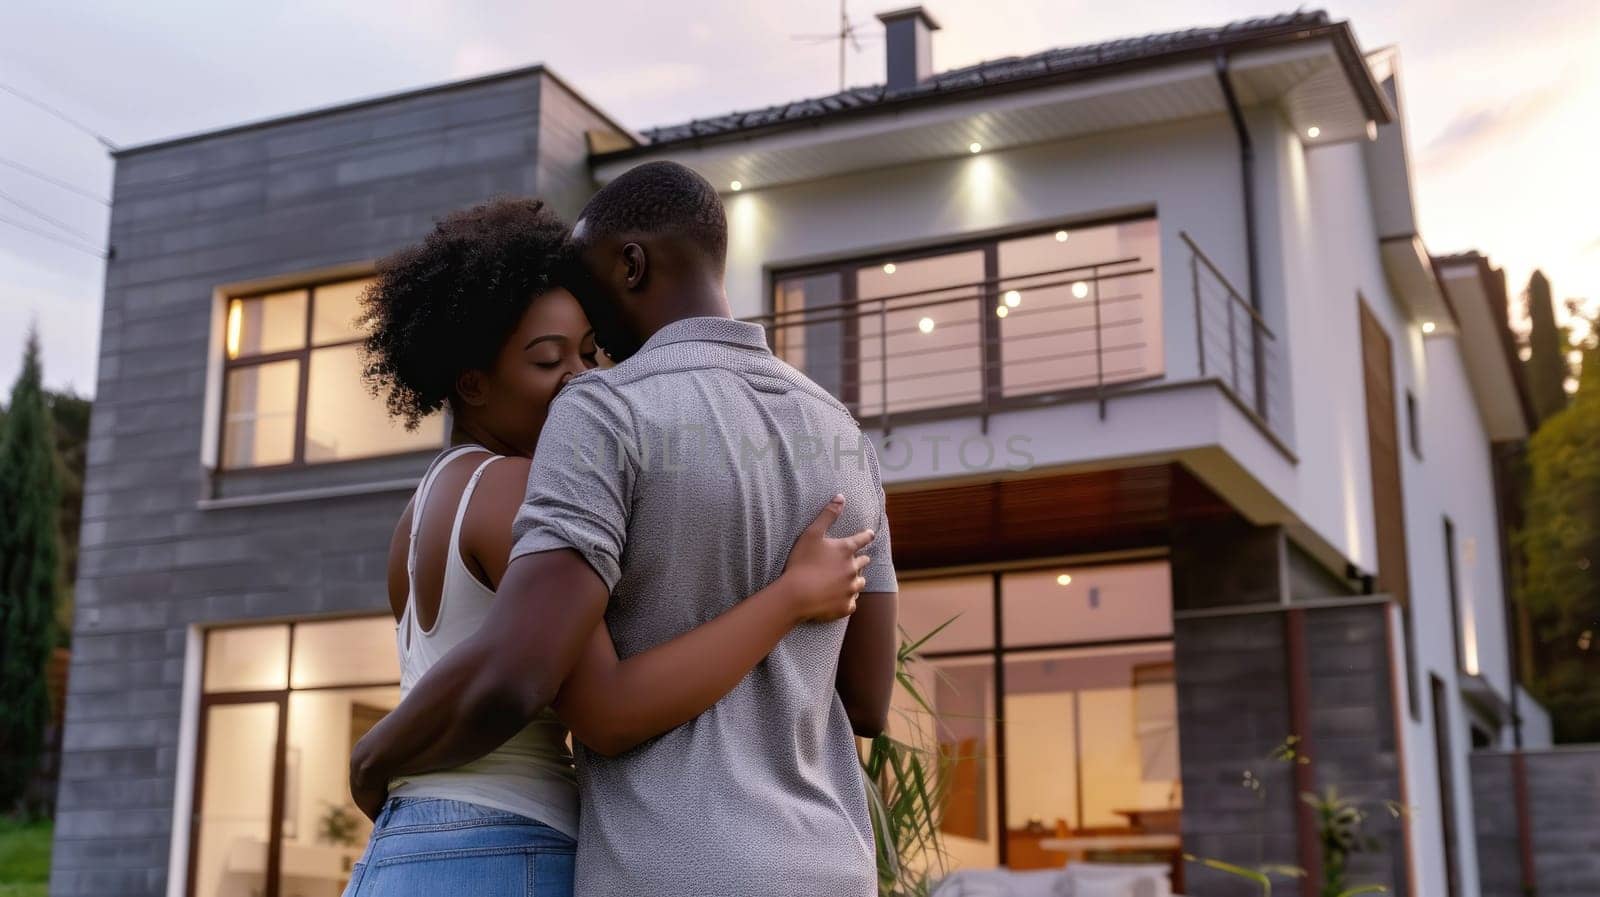 Couple embracing in front of their new big modern house, Buying your dream home concept.